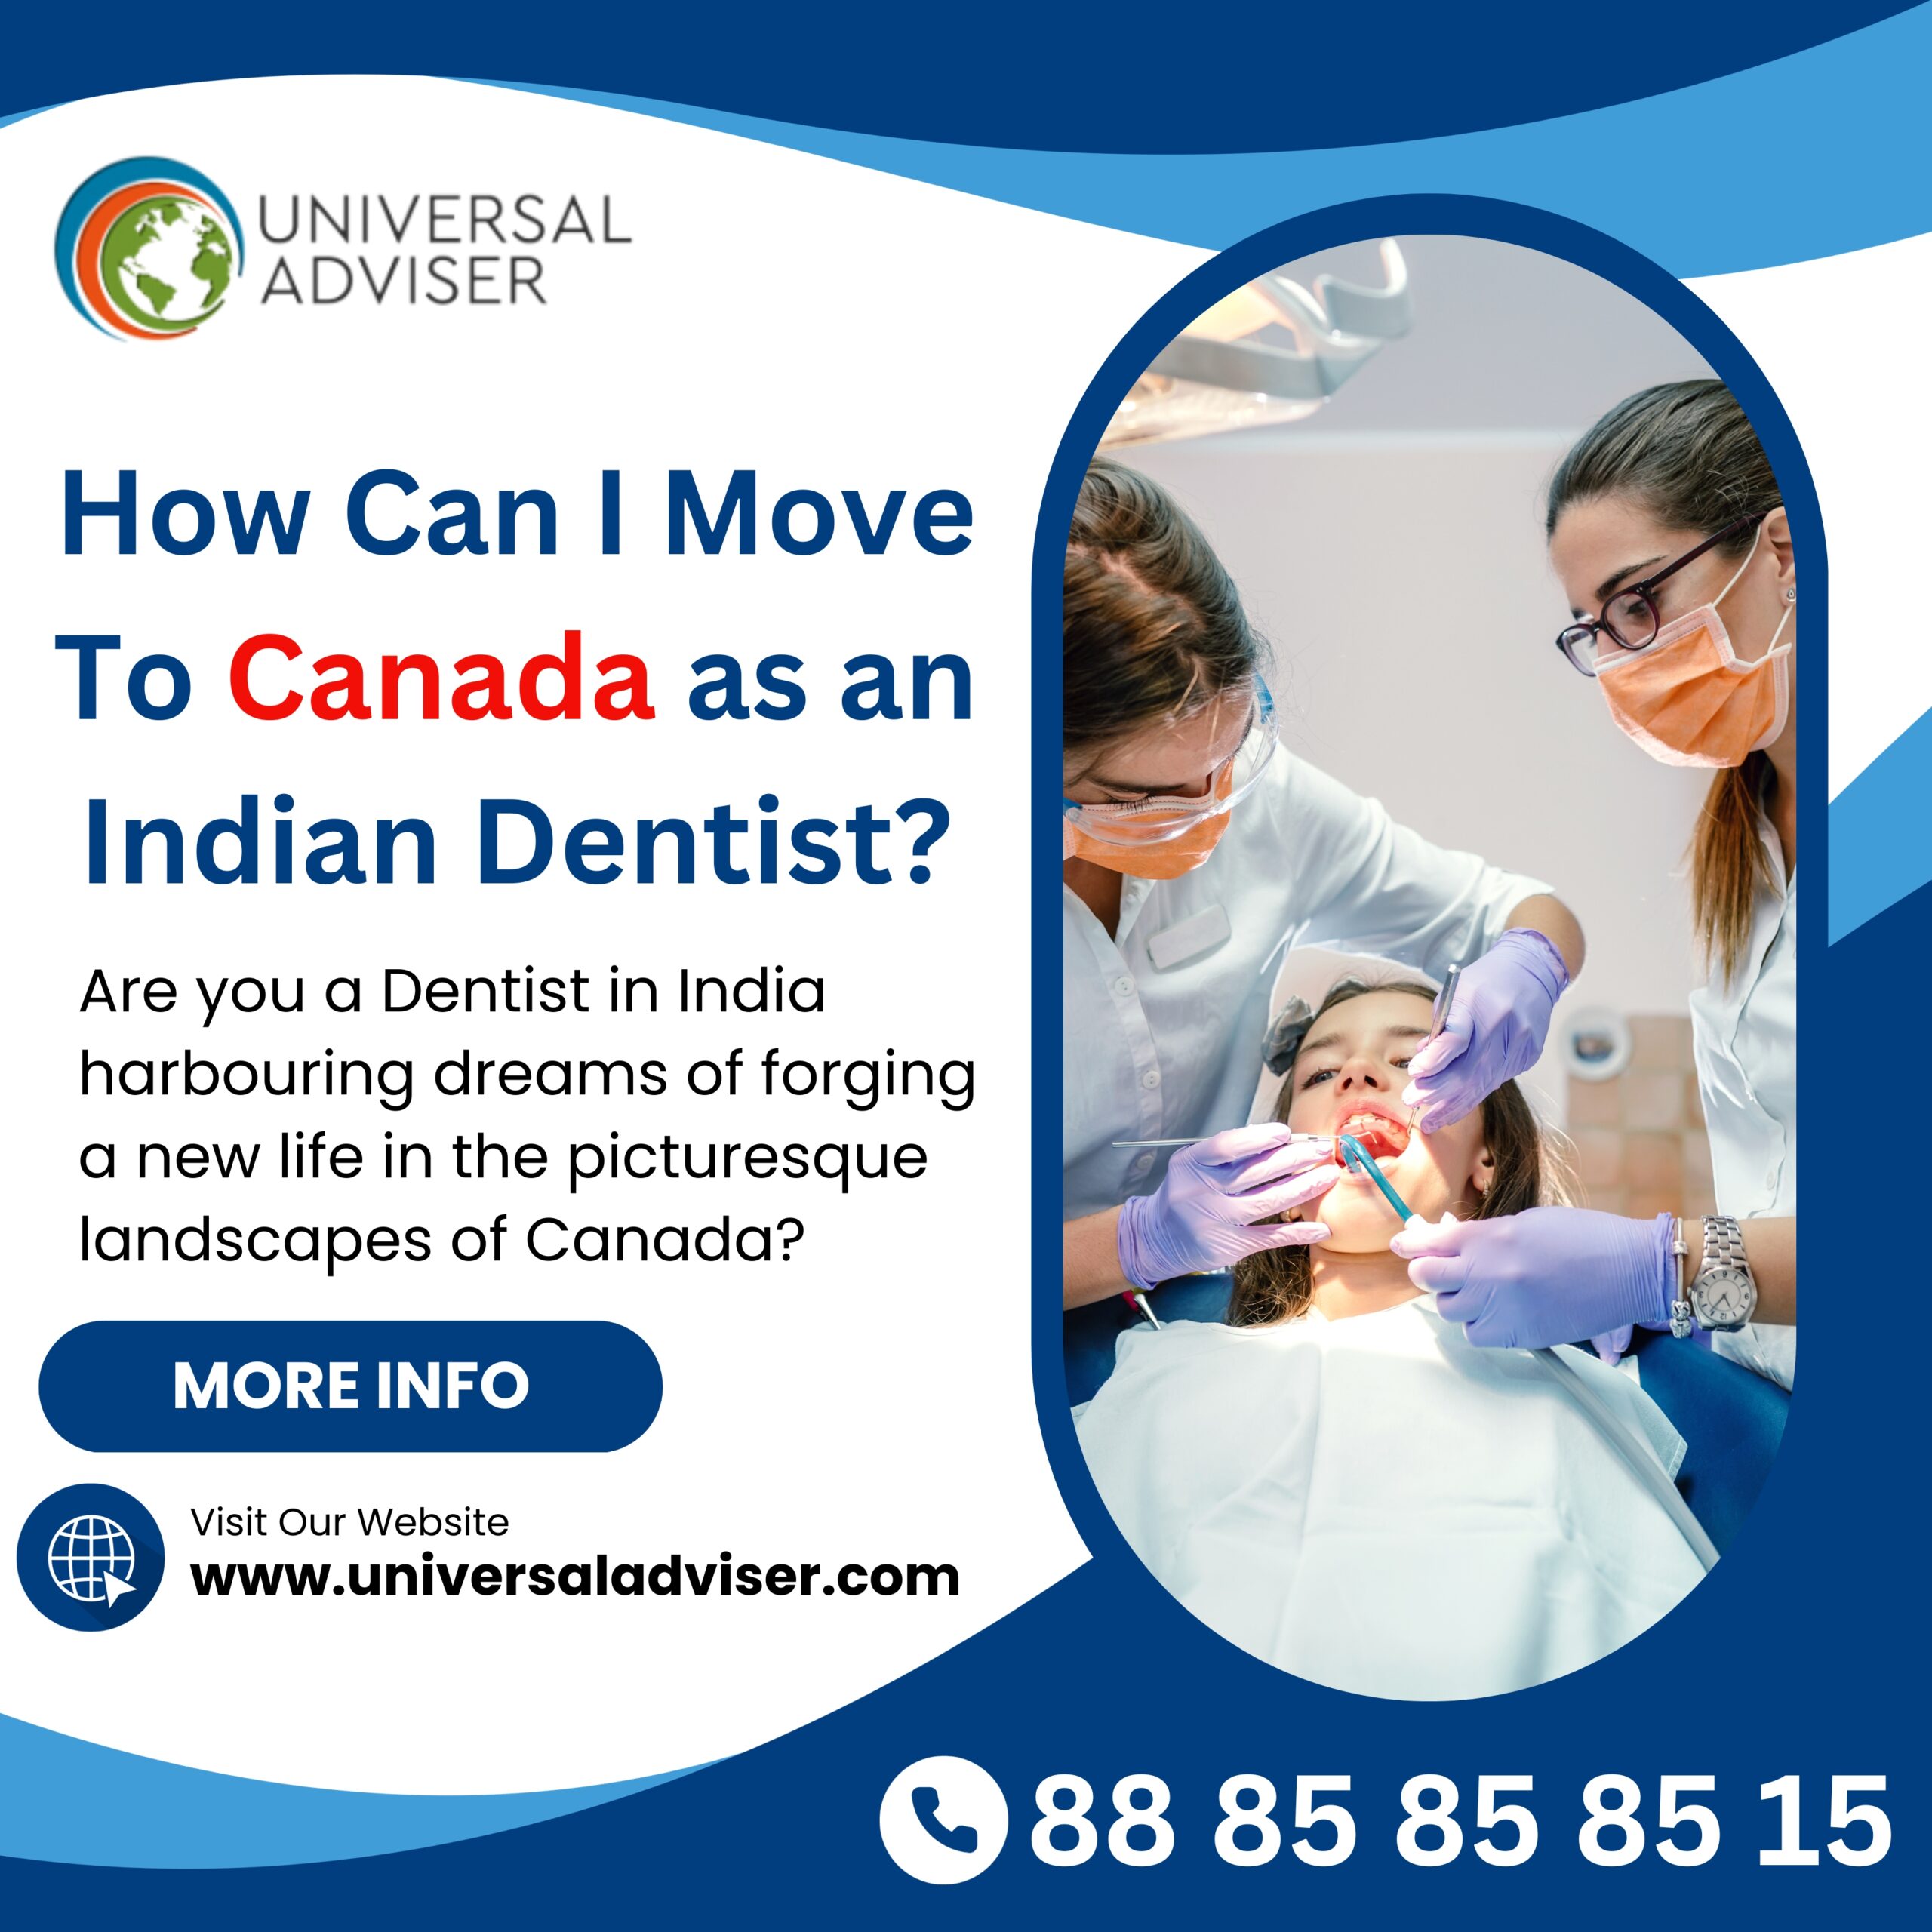 Move To Canada as an Indian Dentist